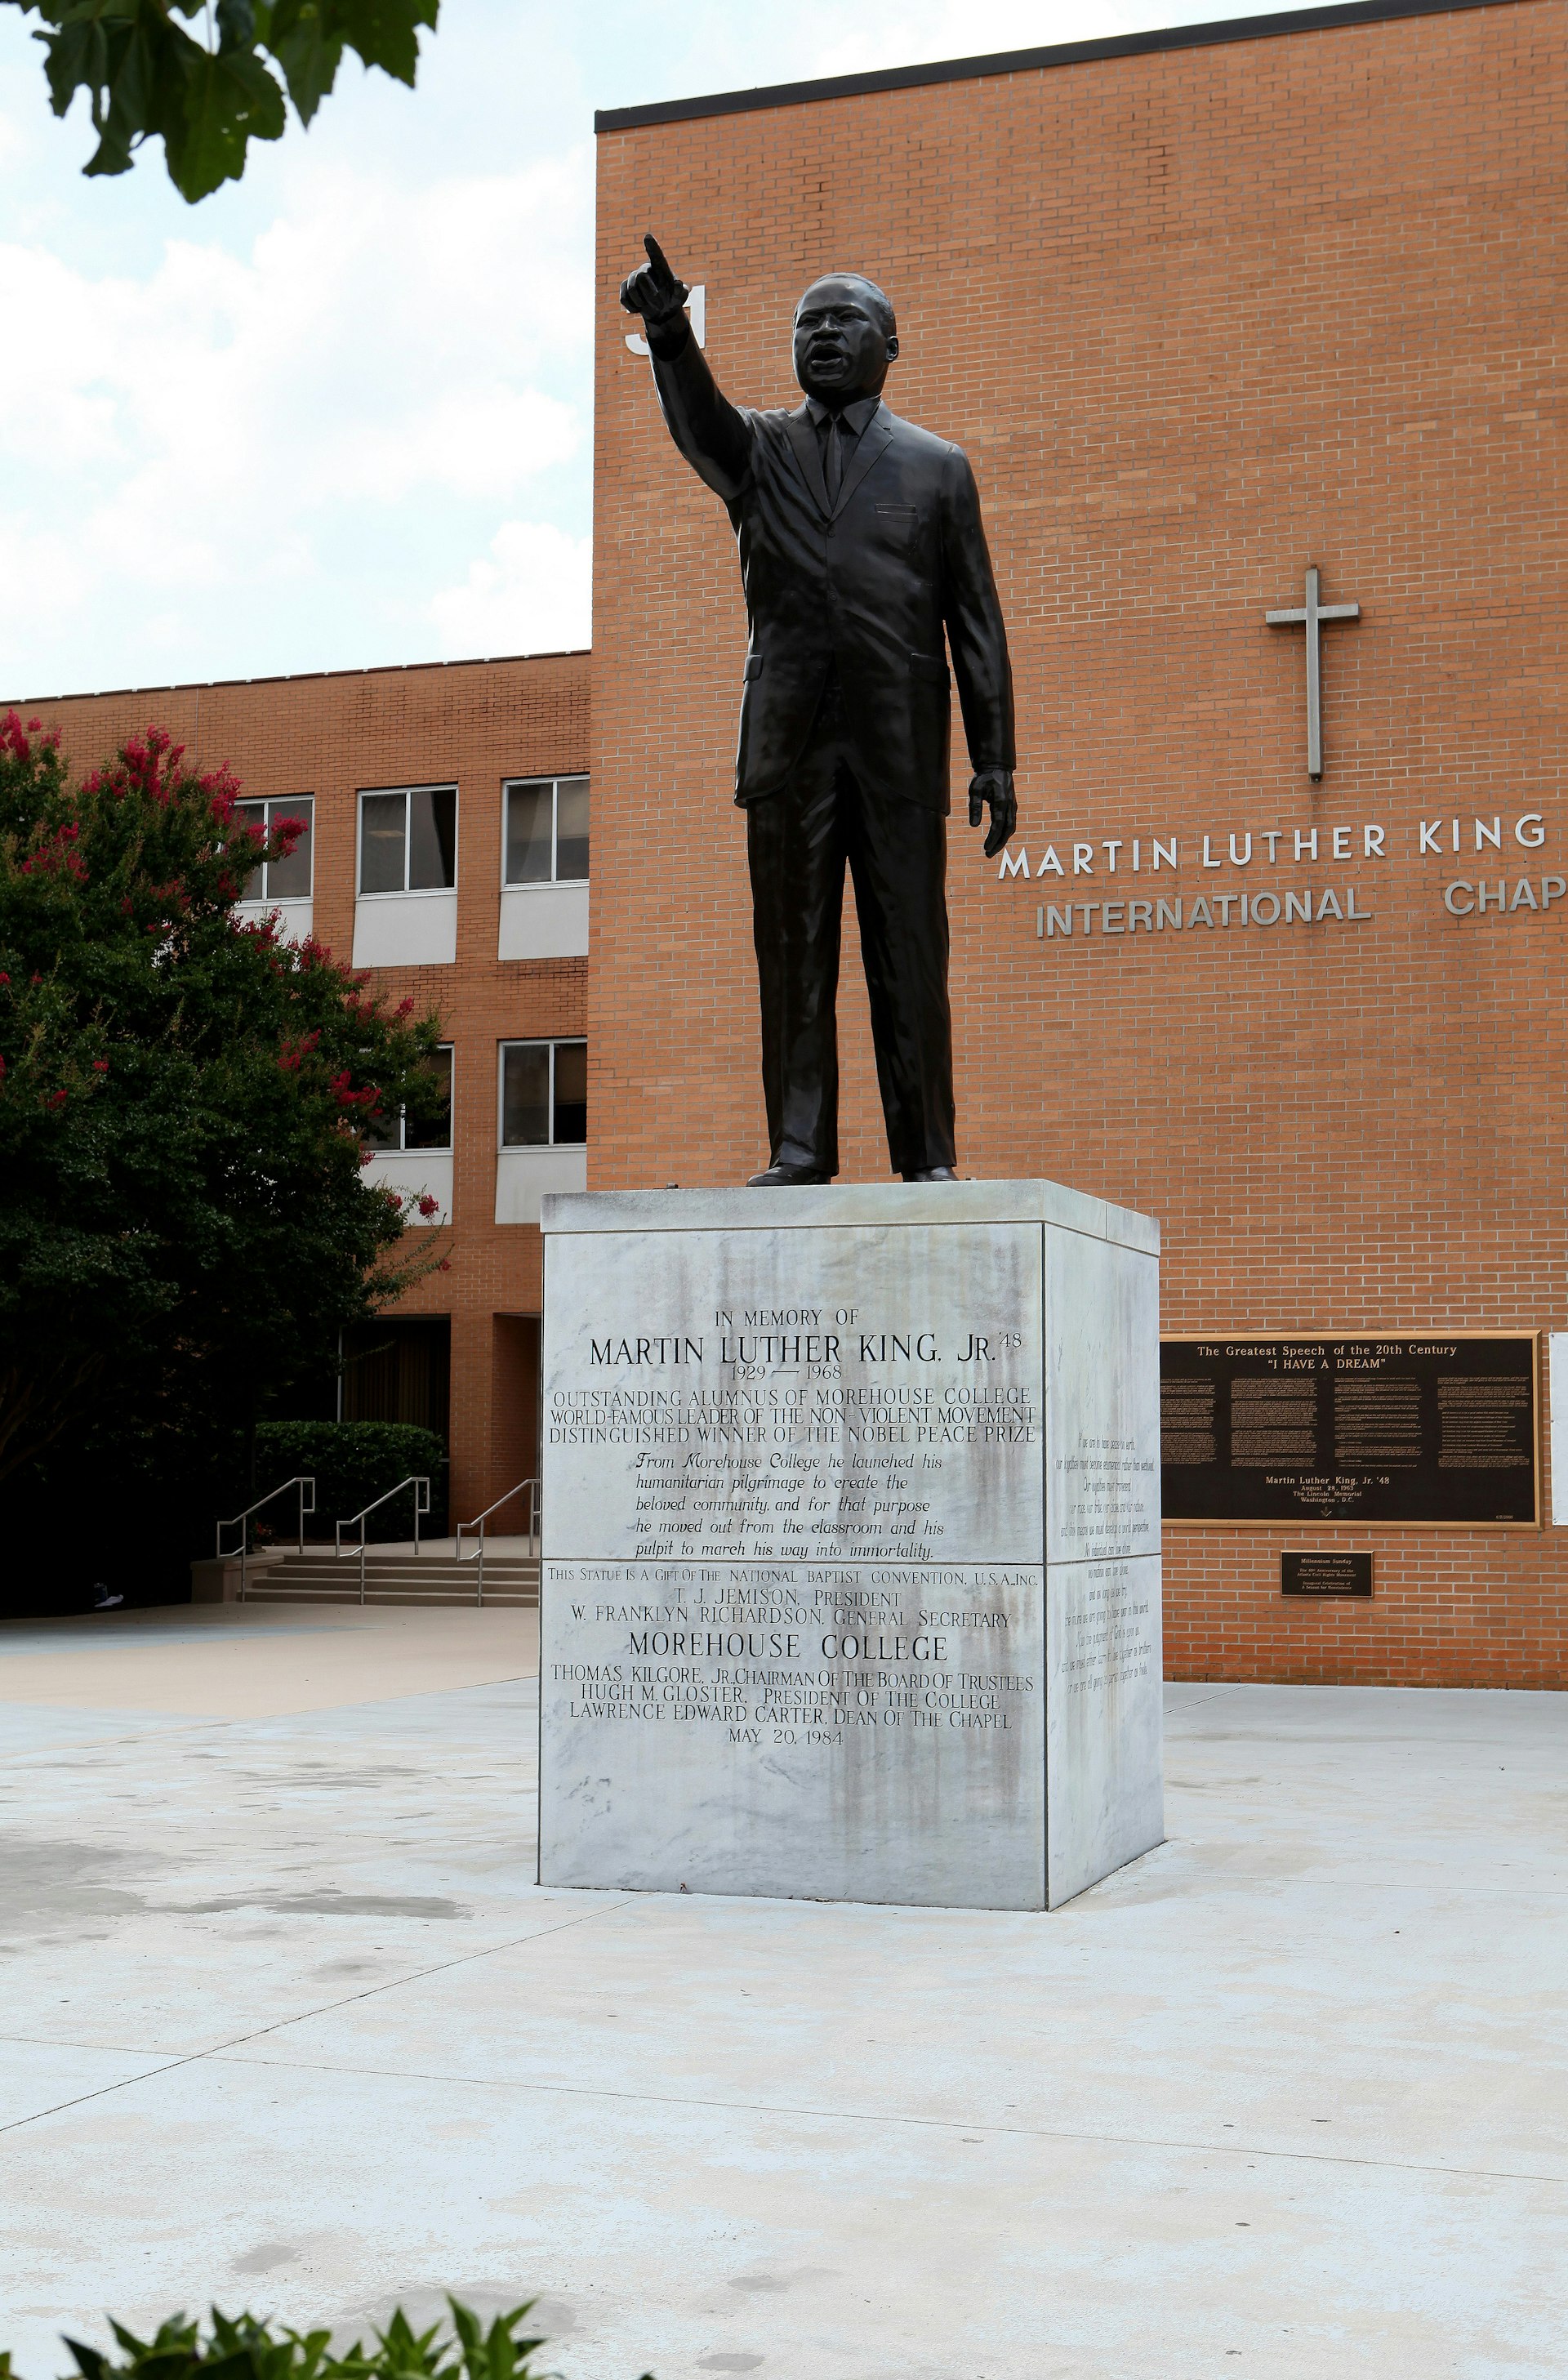 A statue of Dr. Martin Luther King Jr. stands in front of the Martin Luther King Jr. International Chapel at Morehouse College.